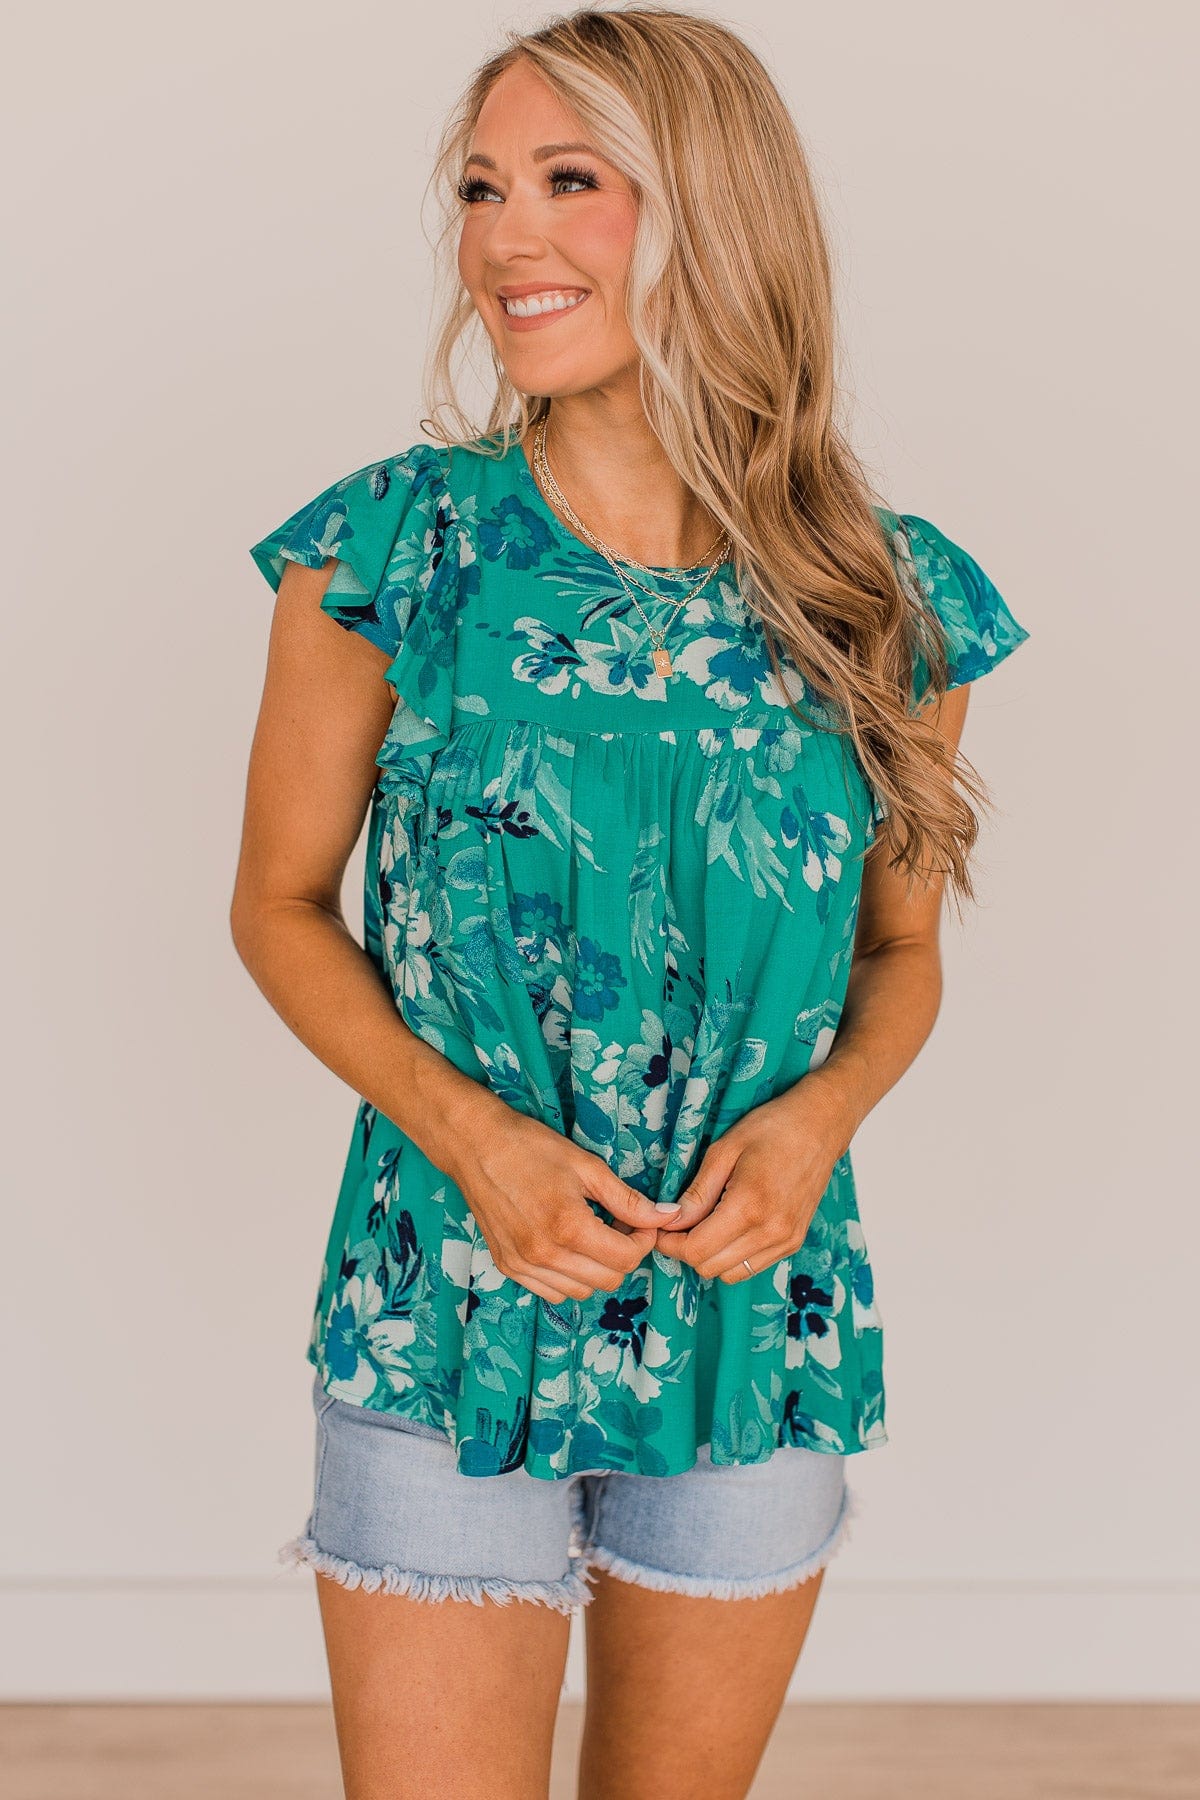 Just By Chance Floral Blouse- Teal